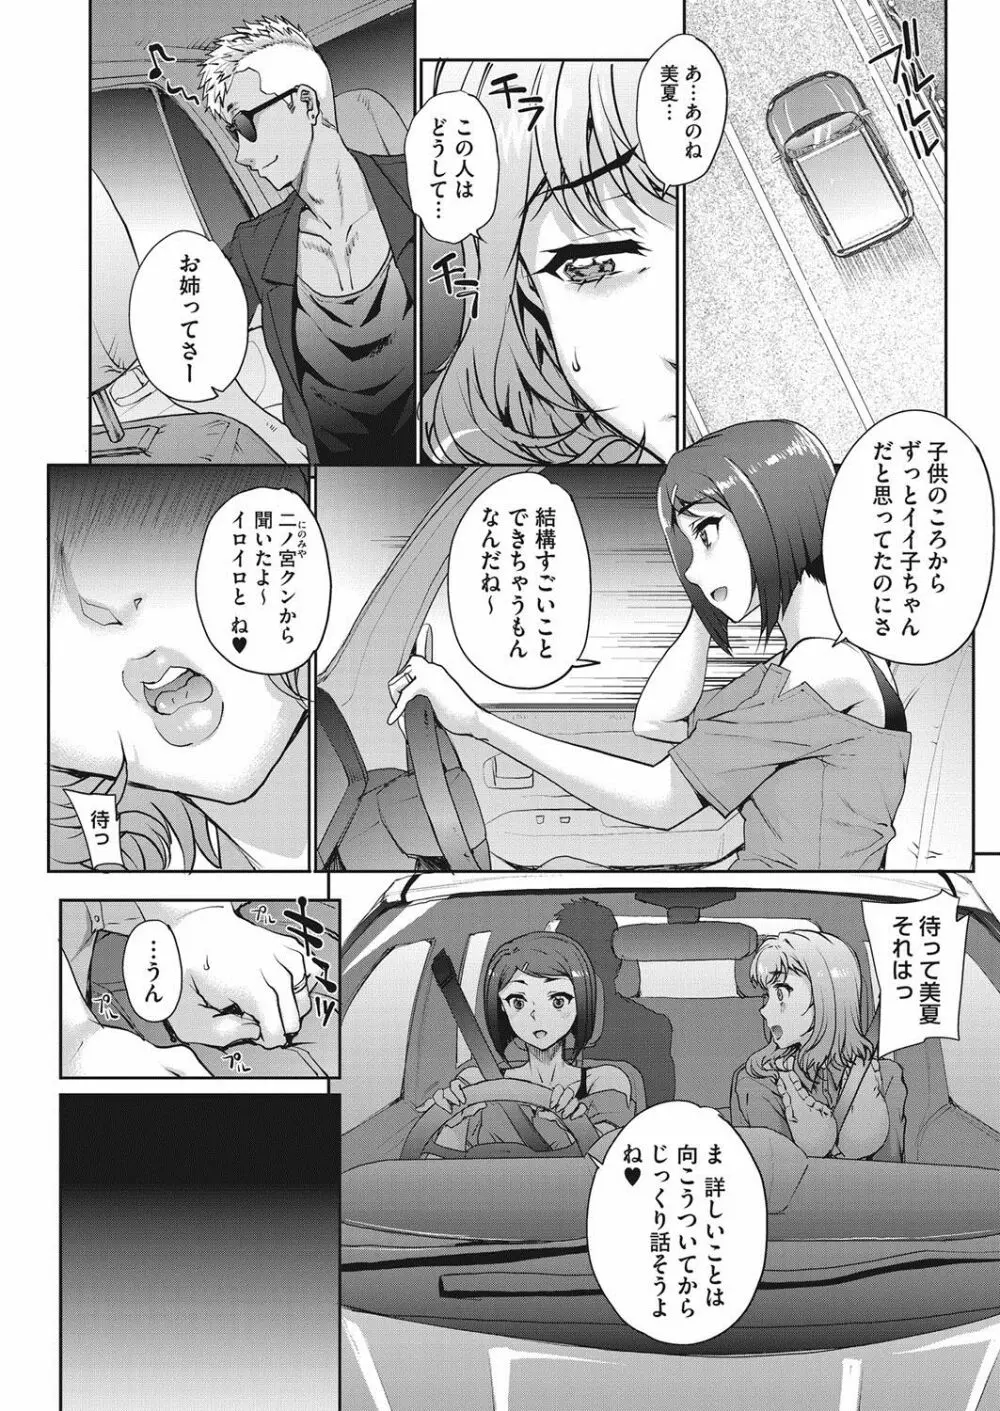 [Carn] Tanshinfunin ~Sisters~ Ch 1-7 61ページ